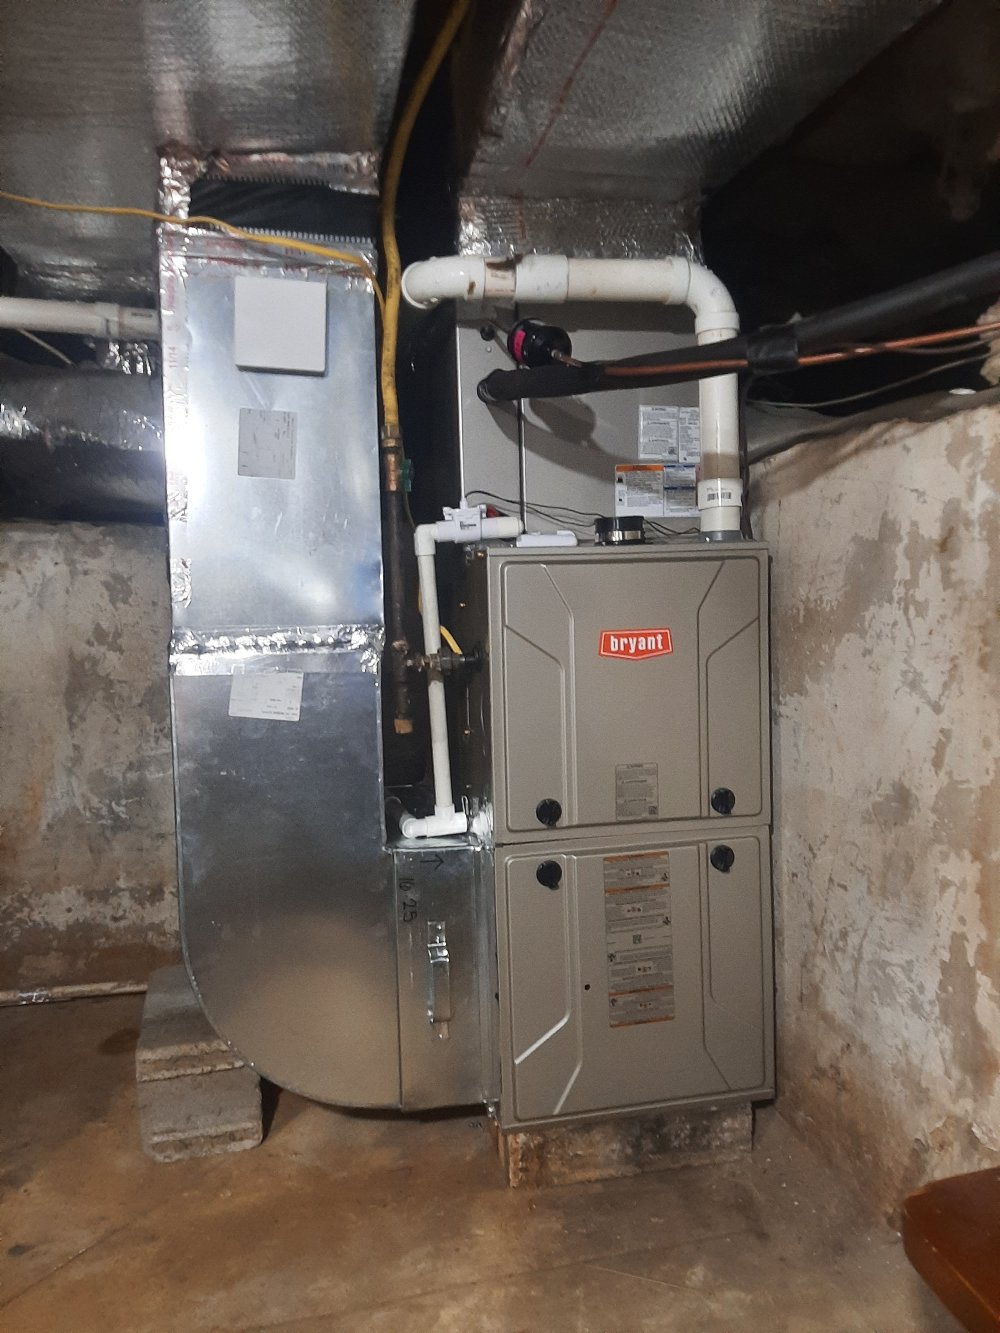 Cracked Heat Exchanger and Carbon Monoxide Leak Problem Solved with New Furnace, Fayette County, KY